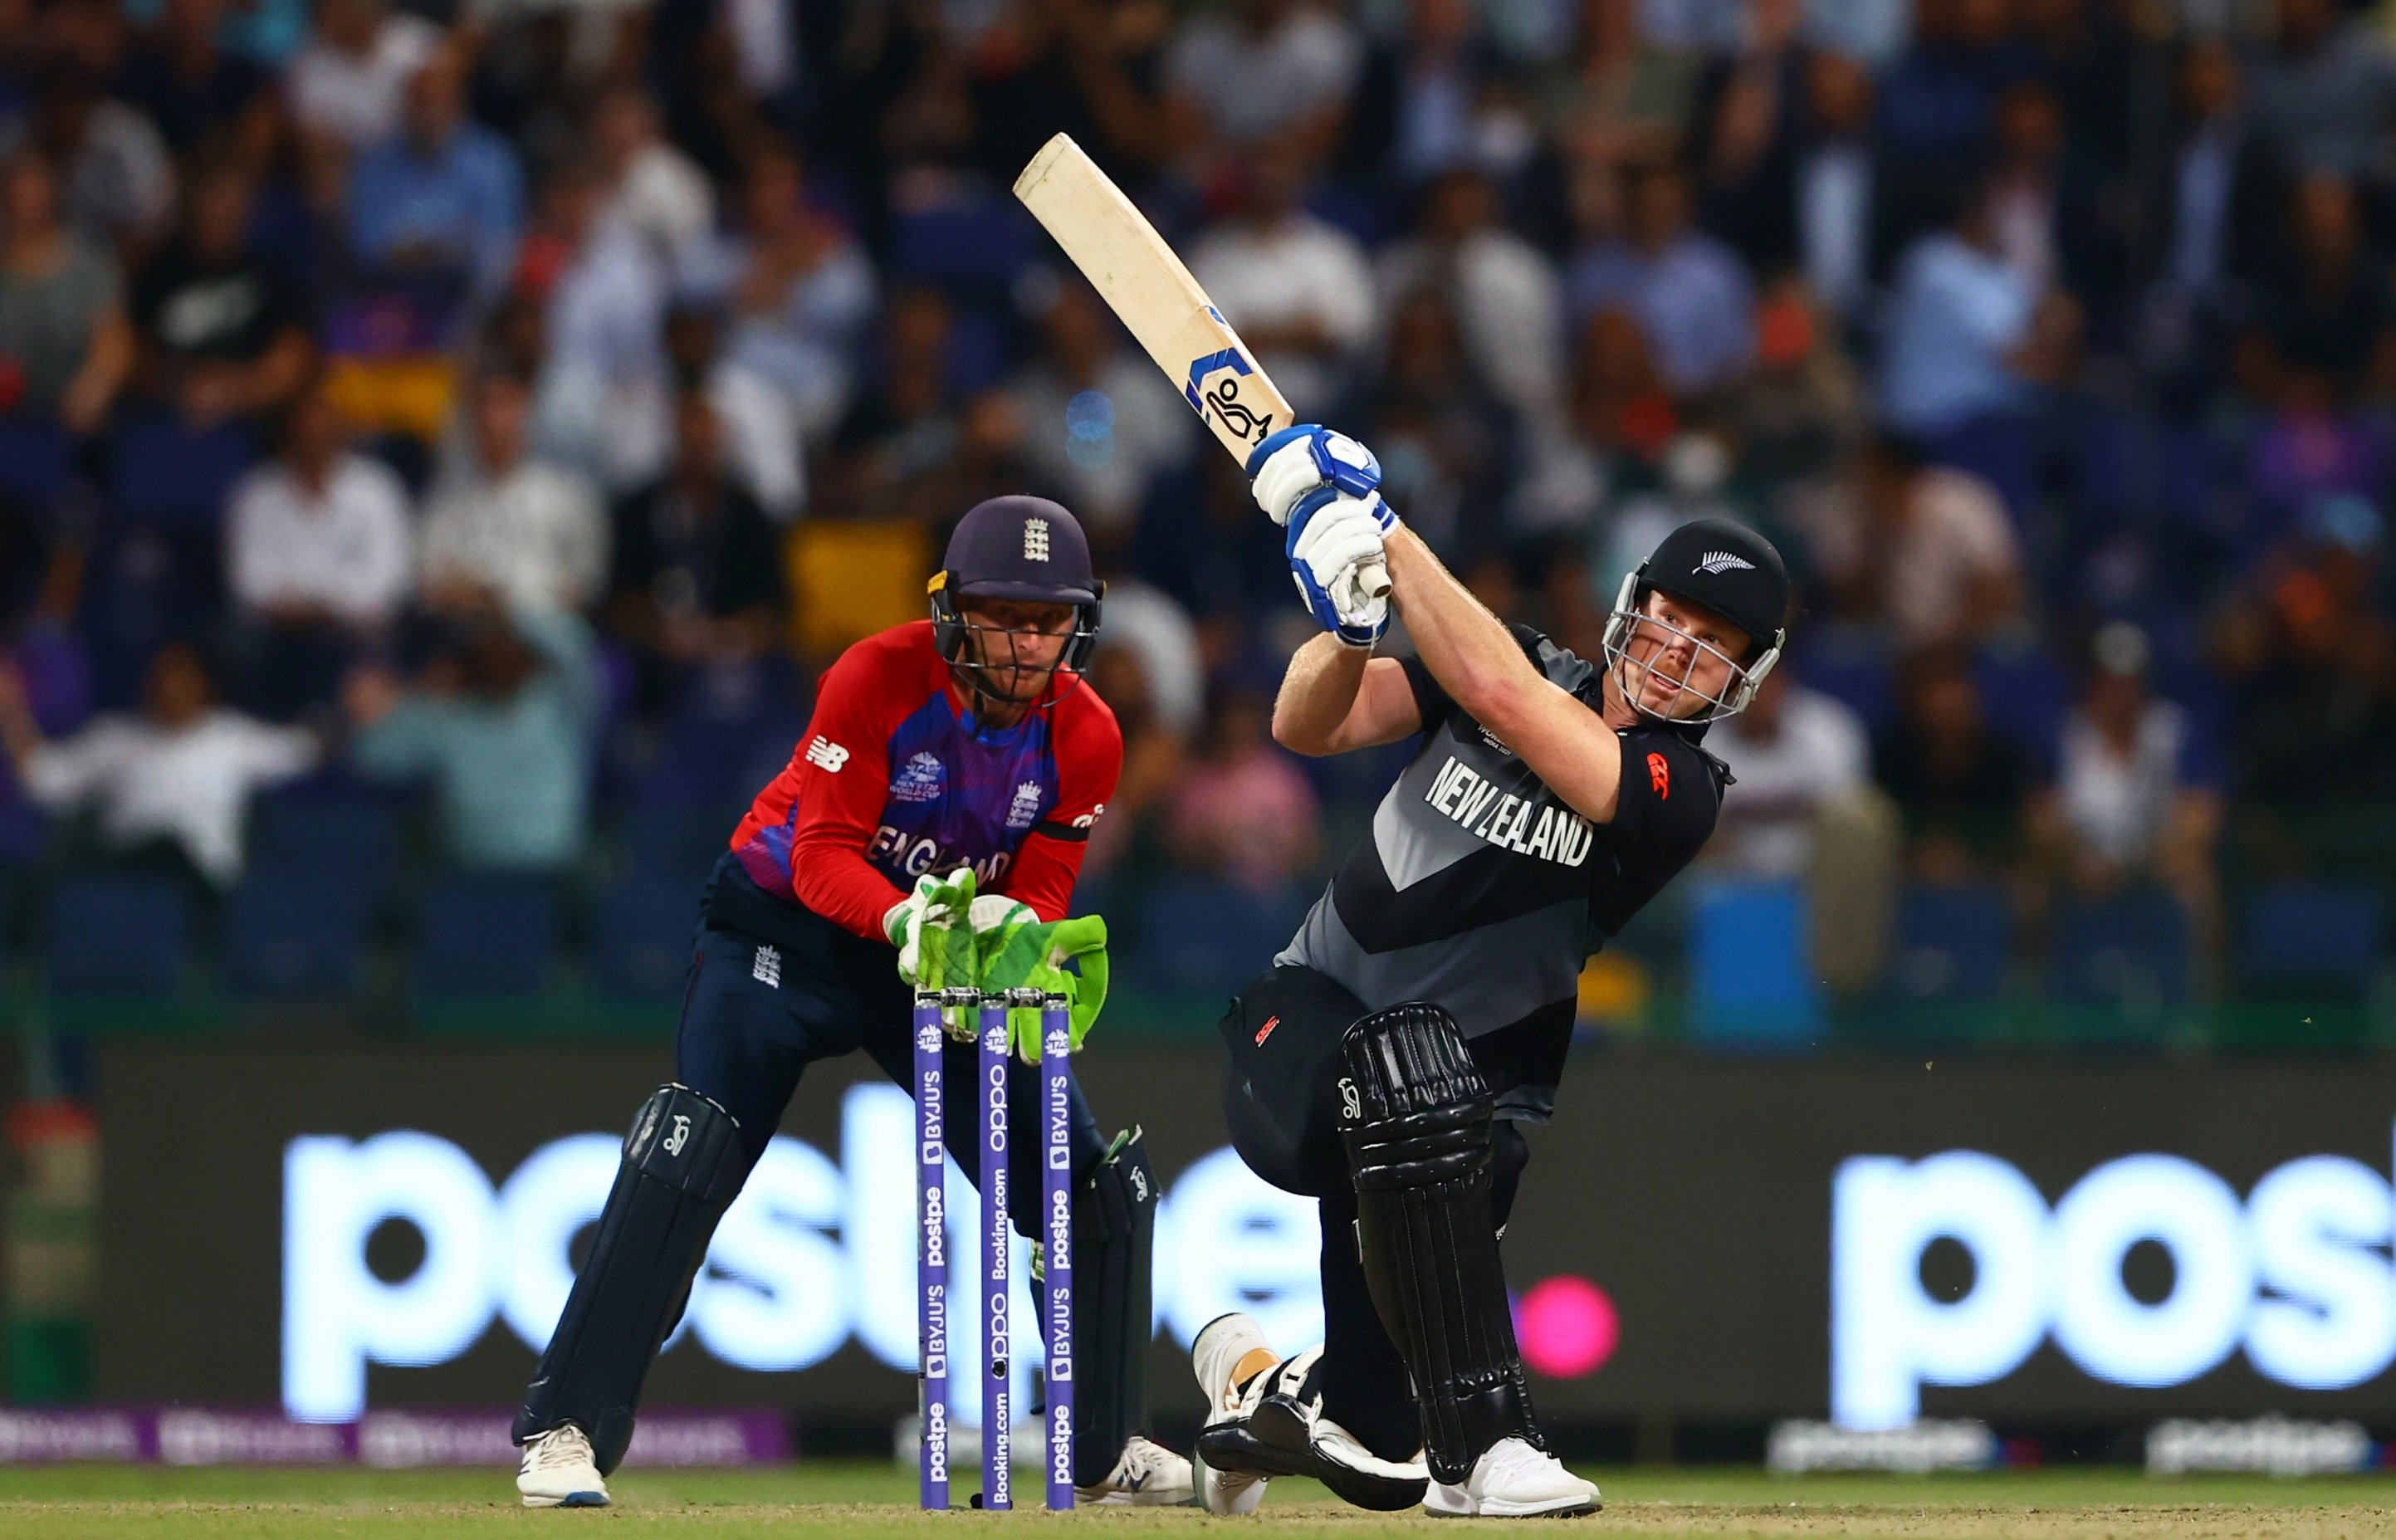 T20 World Cup 2021: Eoin Morgan Wishes To Lead England In Next Year's T20 World Cup As Well